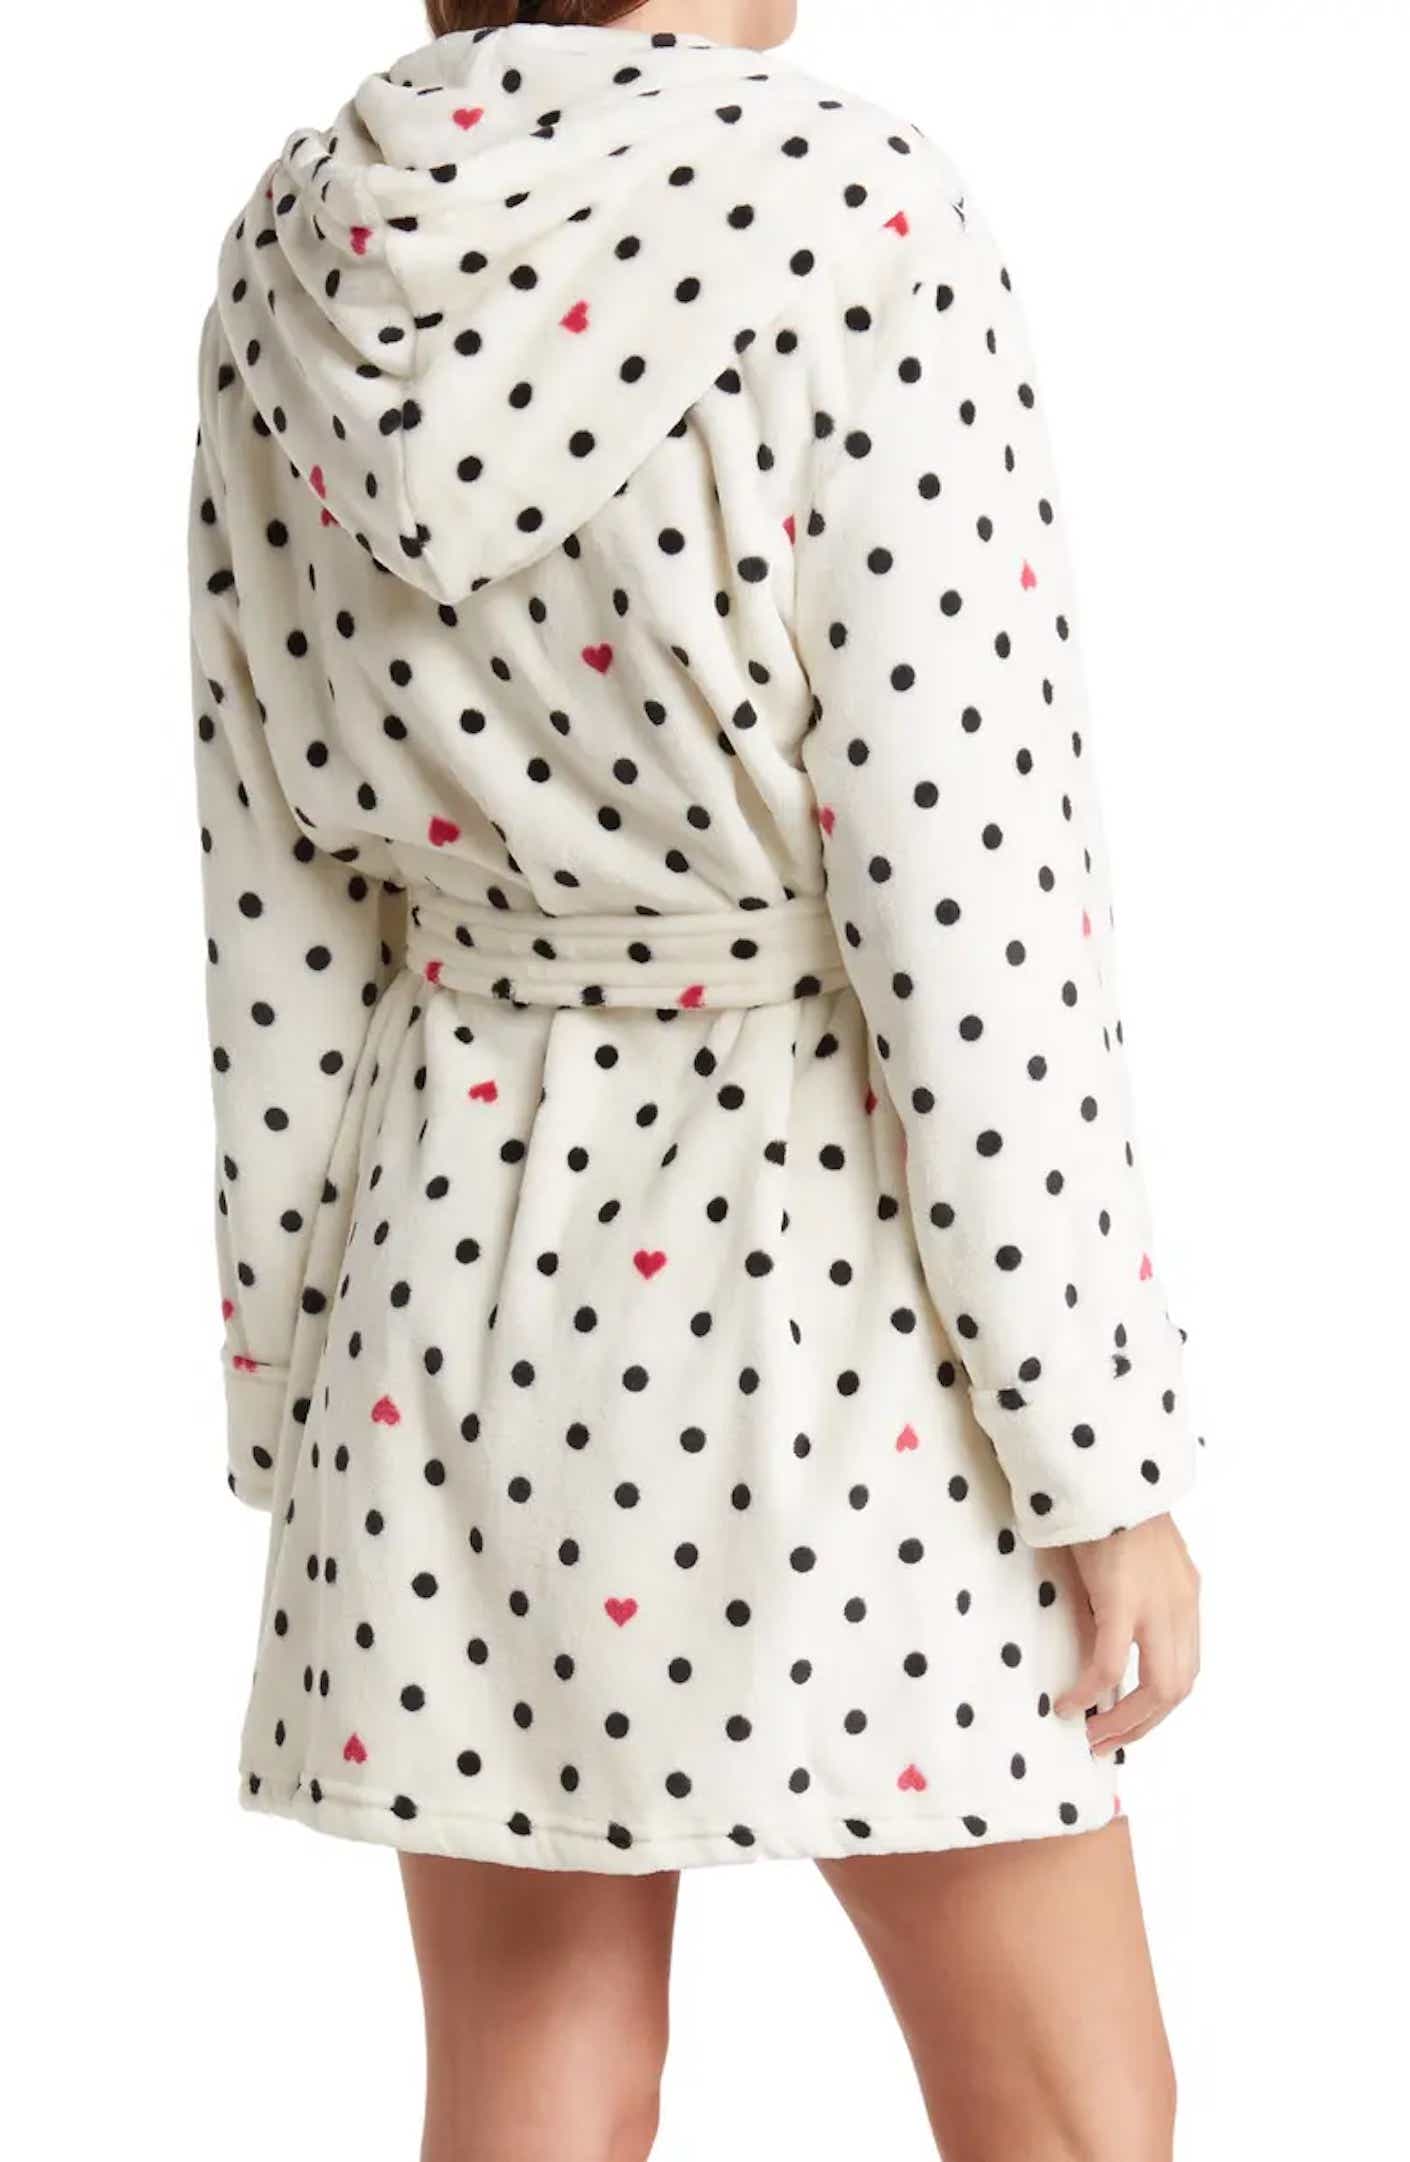 A woman wears a plush, hooded, cream colored robe printed with black polta dots and small red hearts that hits at mid-thigh.